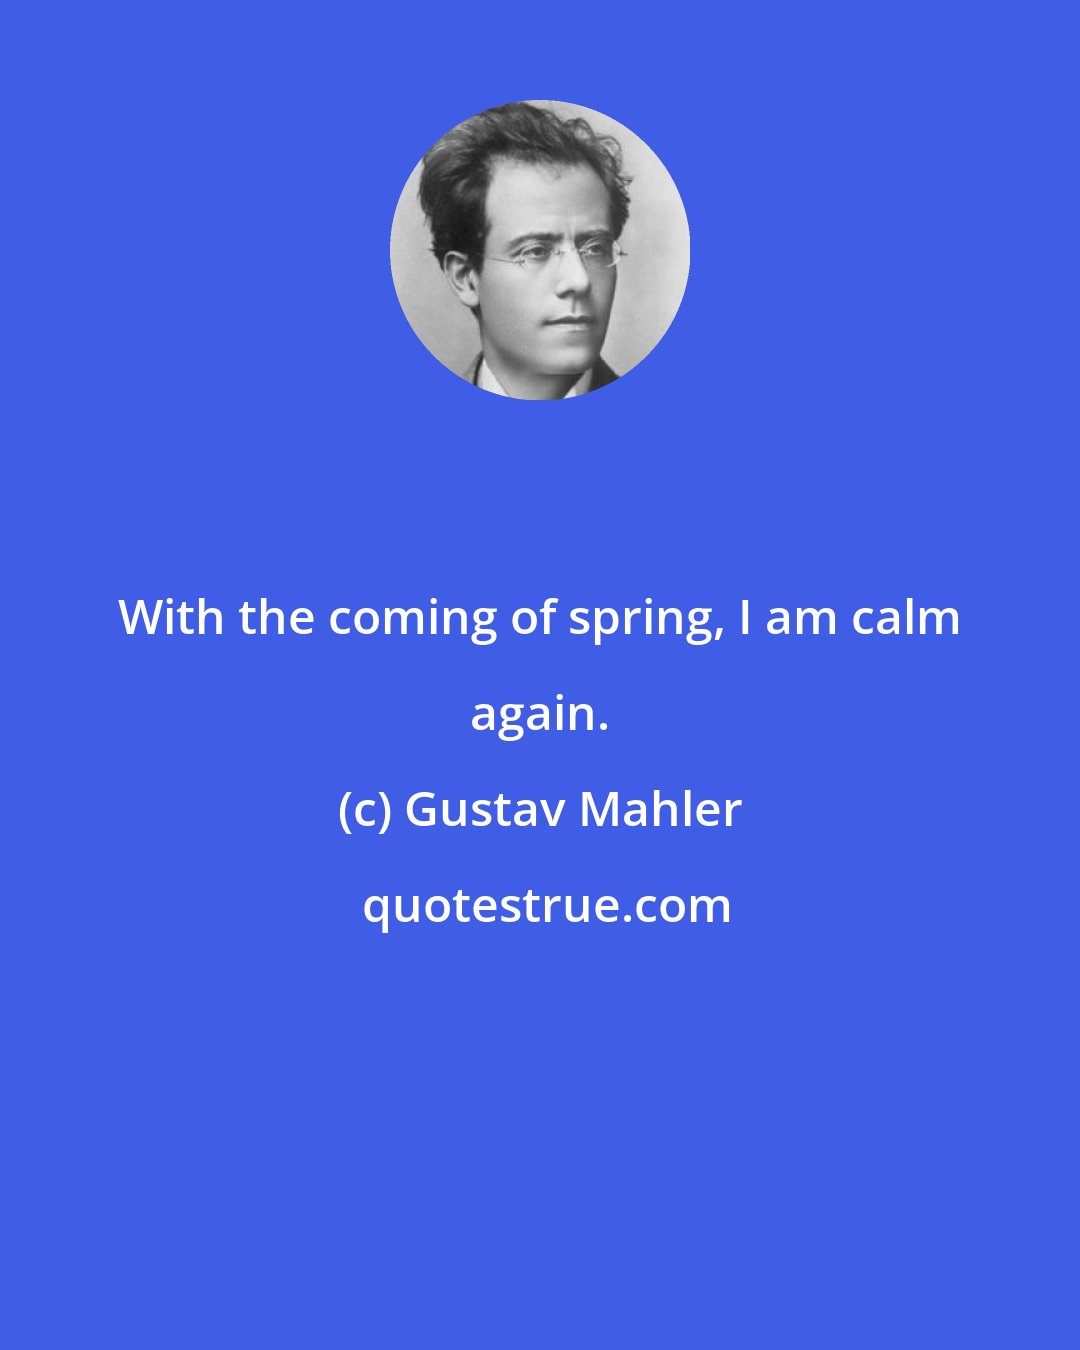 Gustav Mahler: With the coming of spring, I am calm again.